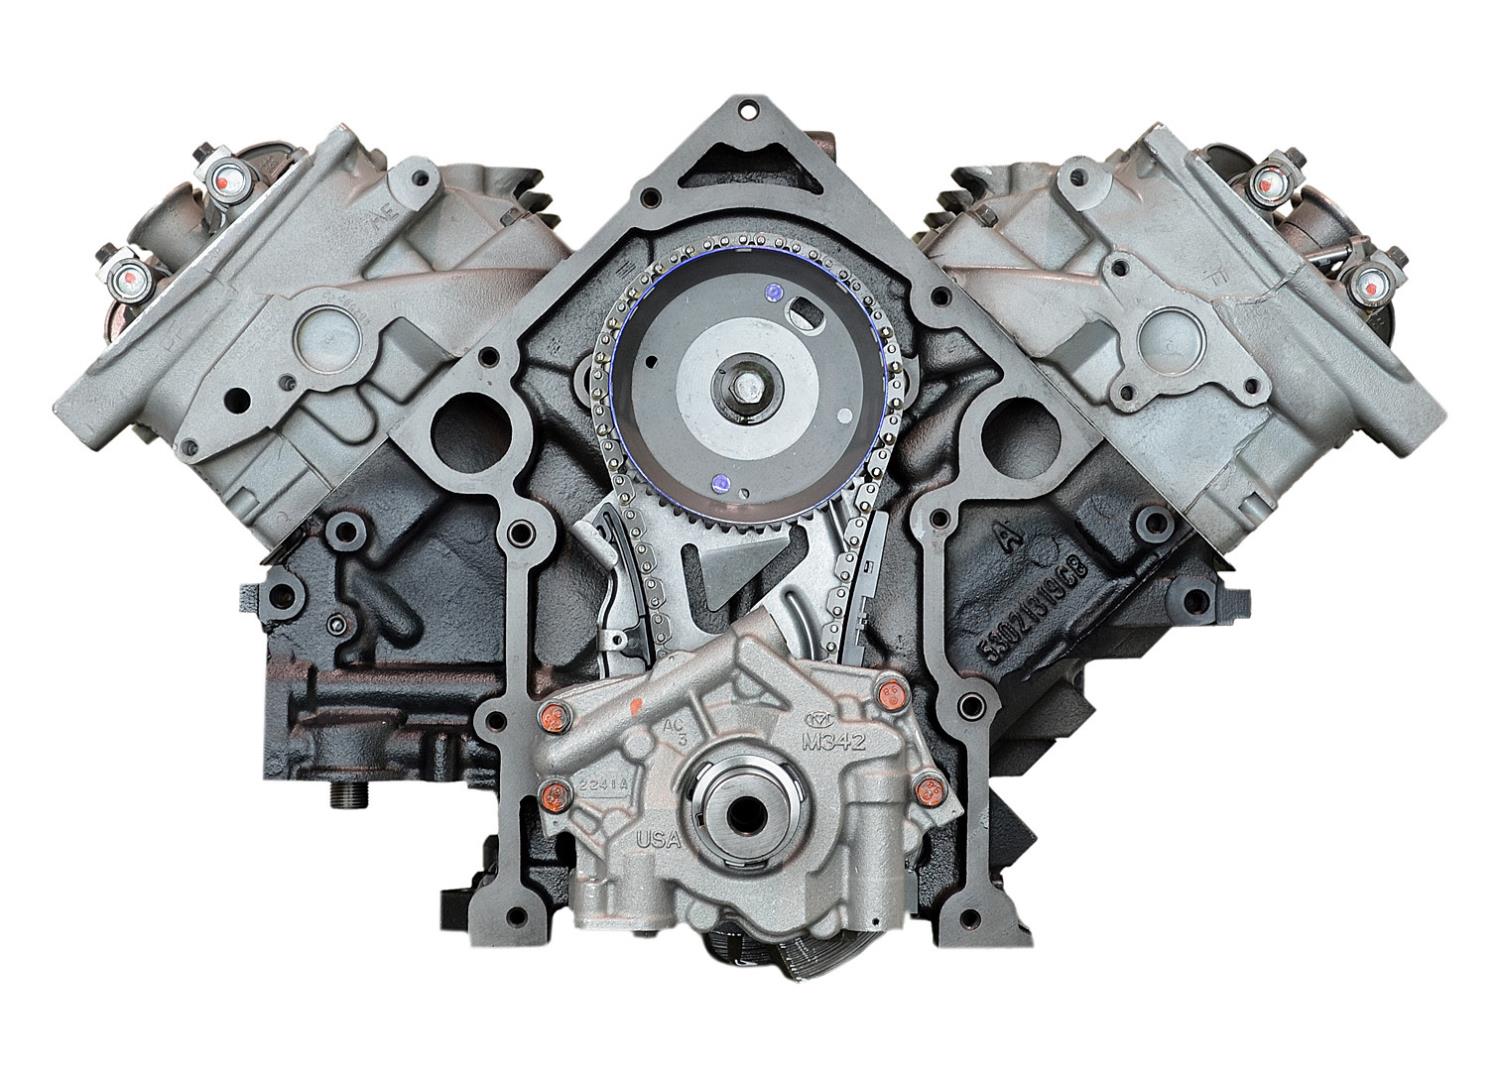 Dodge Ram Truck & Durango with 5.7L HEMI V8 ATK Engines - DDH8:  Remanufactured Crate Engine - JEGS